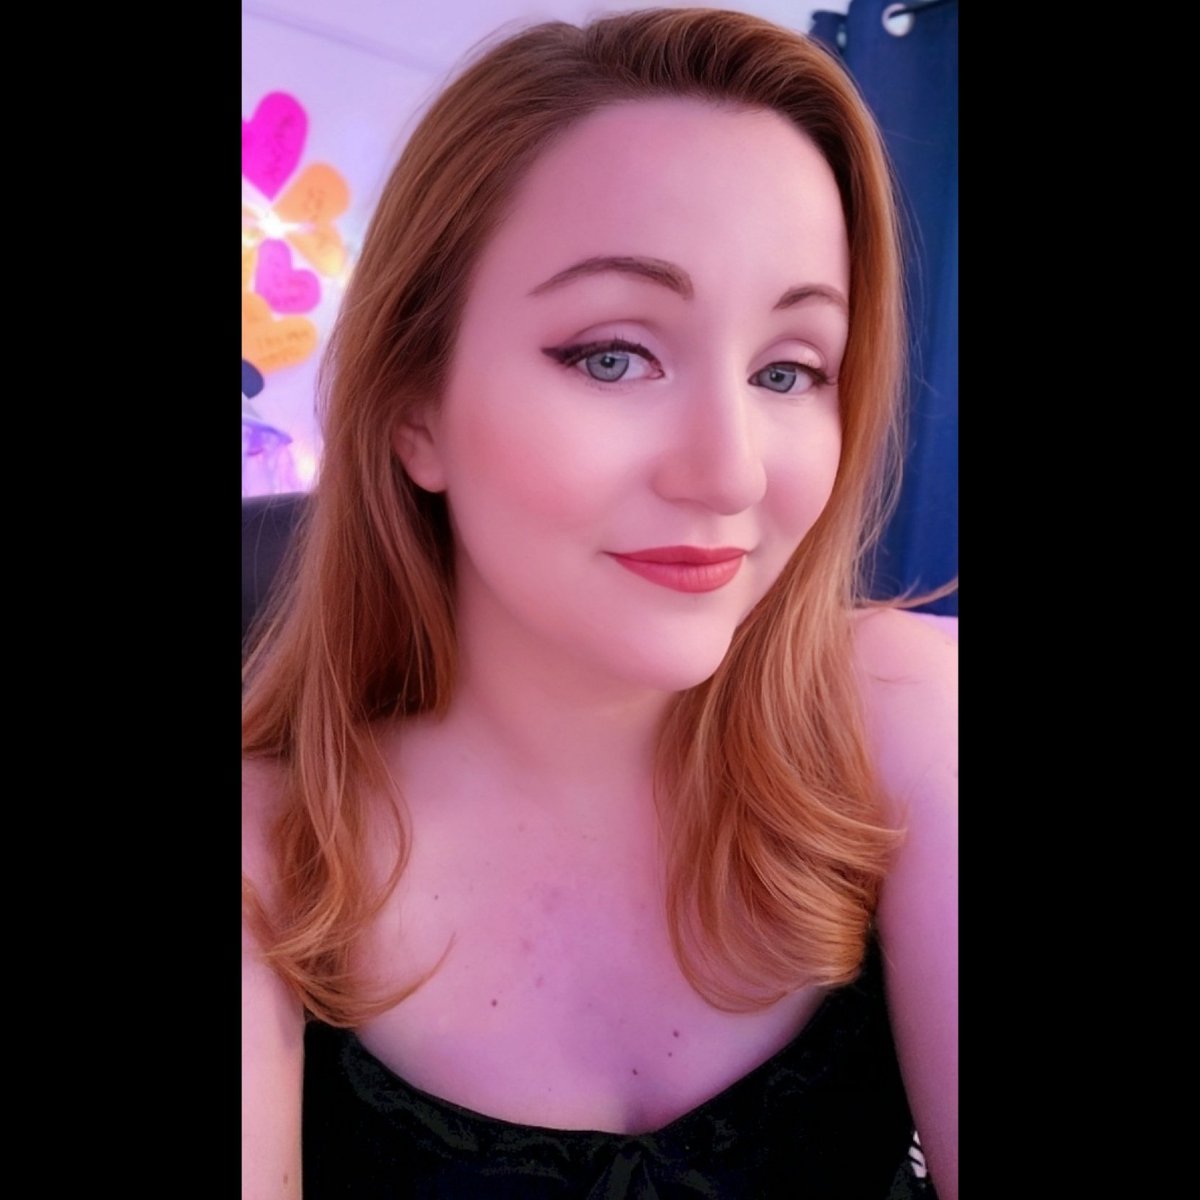 I'm playing Fallout 76, then Fallout 4 live on Twitch! It's a Sunday Soiree and you're invited. ❤️ twitch.tv/dahliatheholog… #twitch #fallout4 #fallout76 #viralvideo